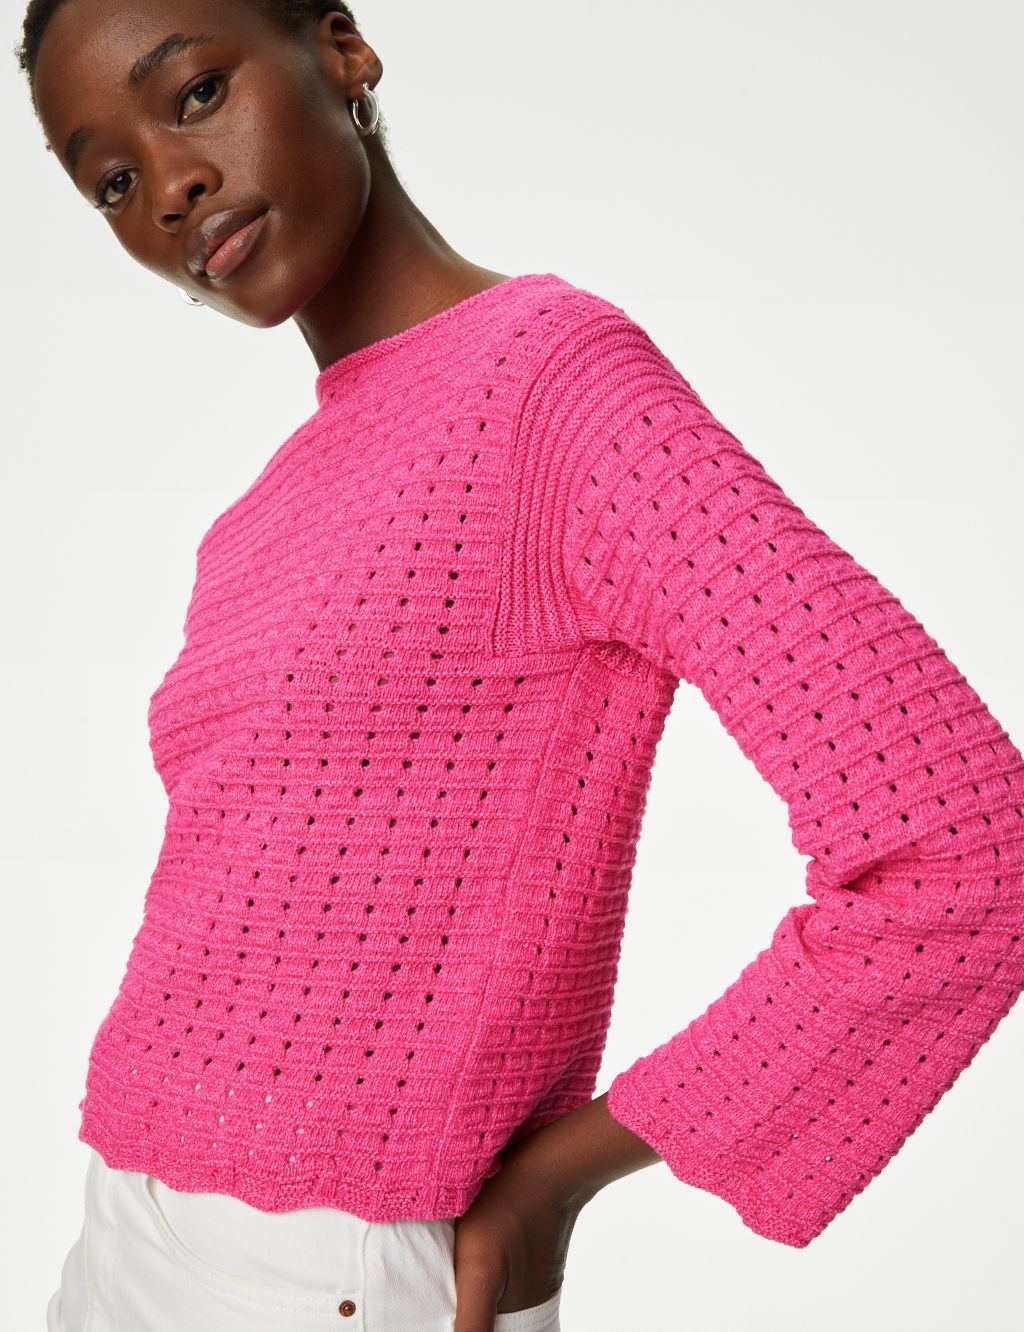 Women's Pink Jumpers